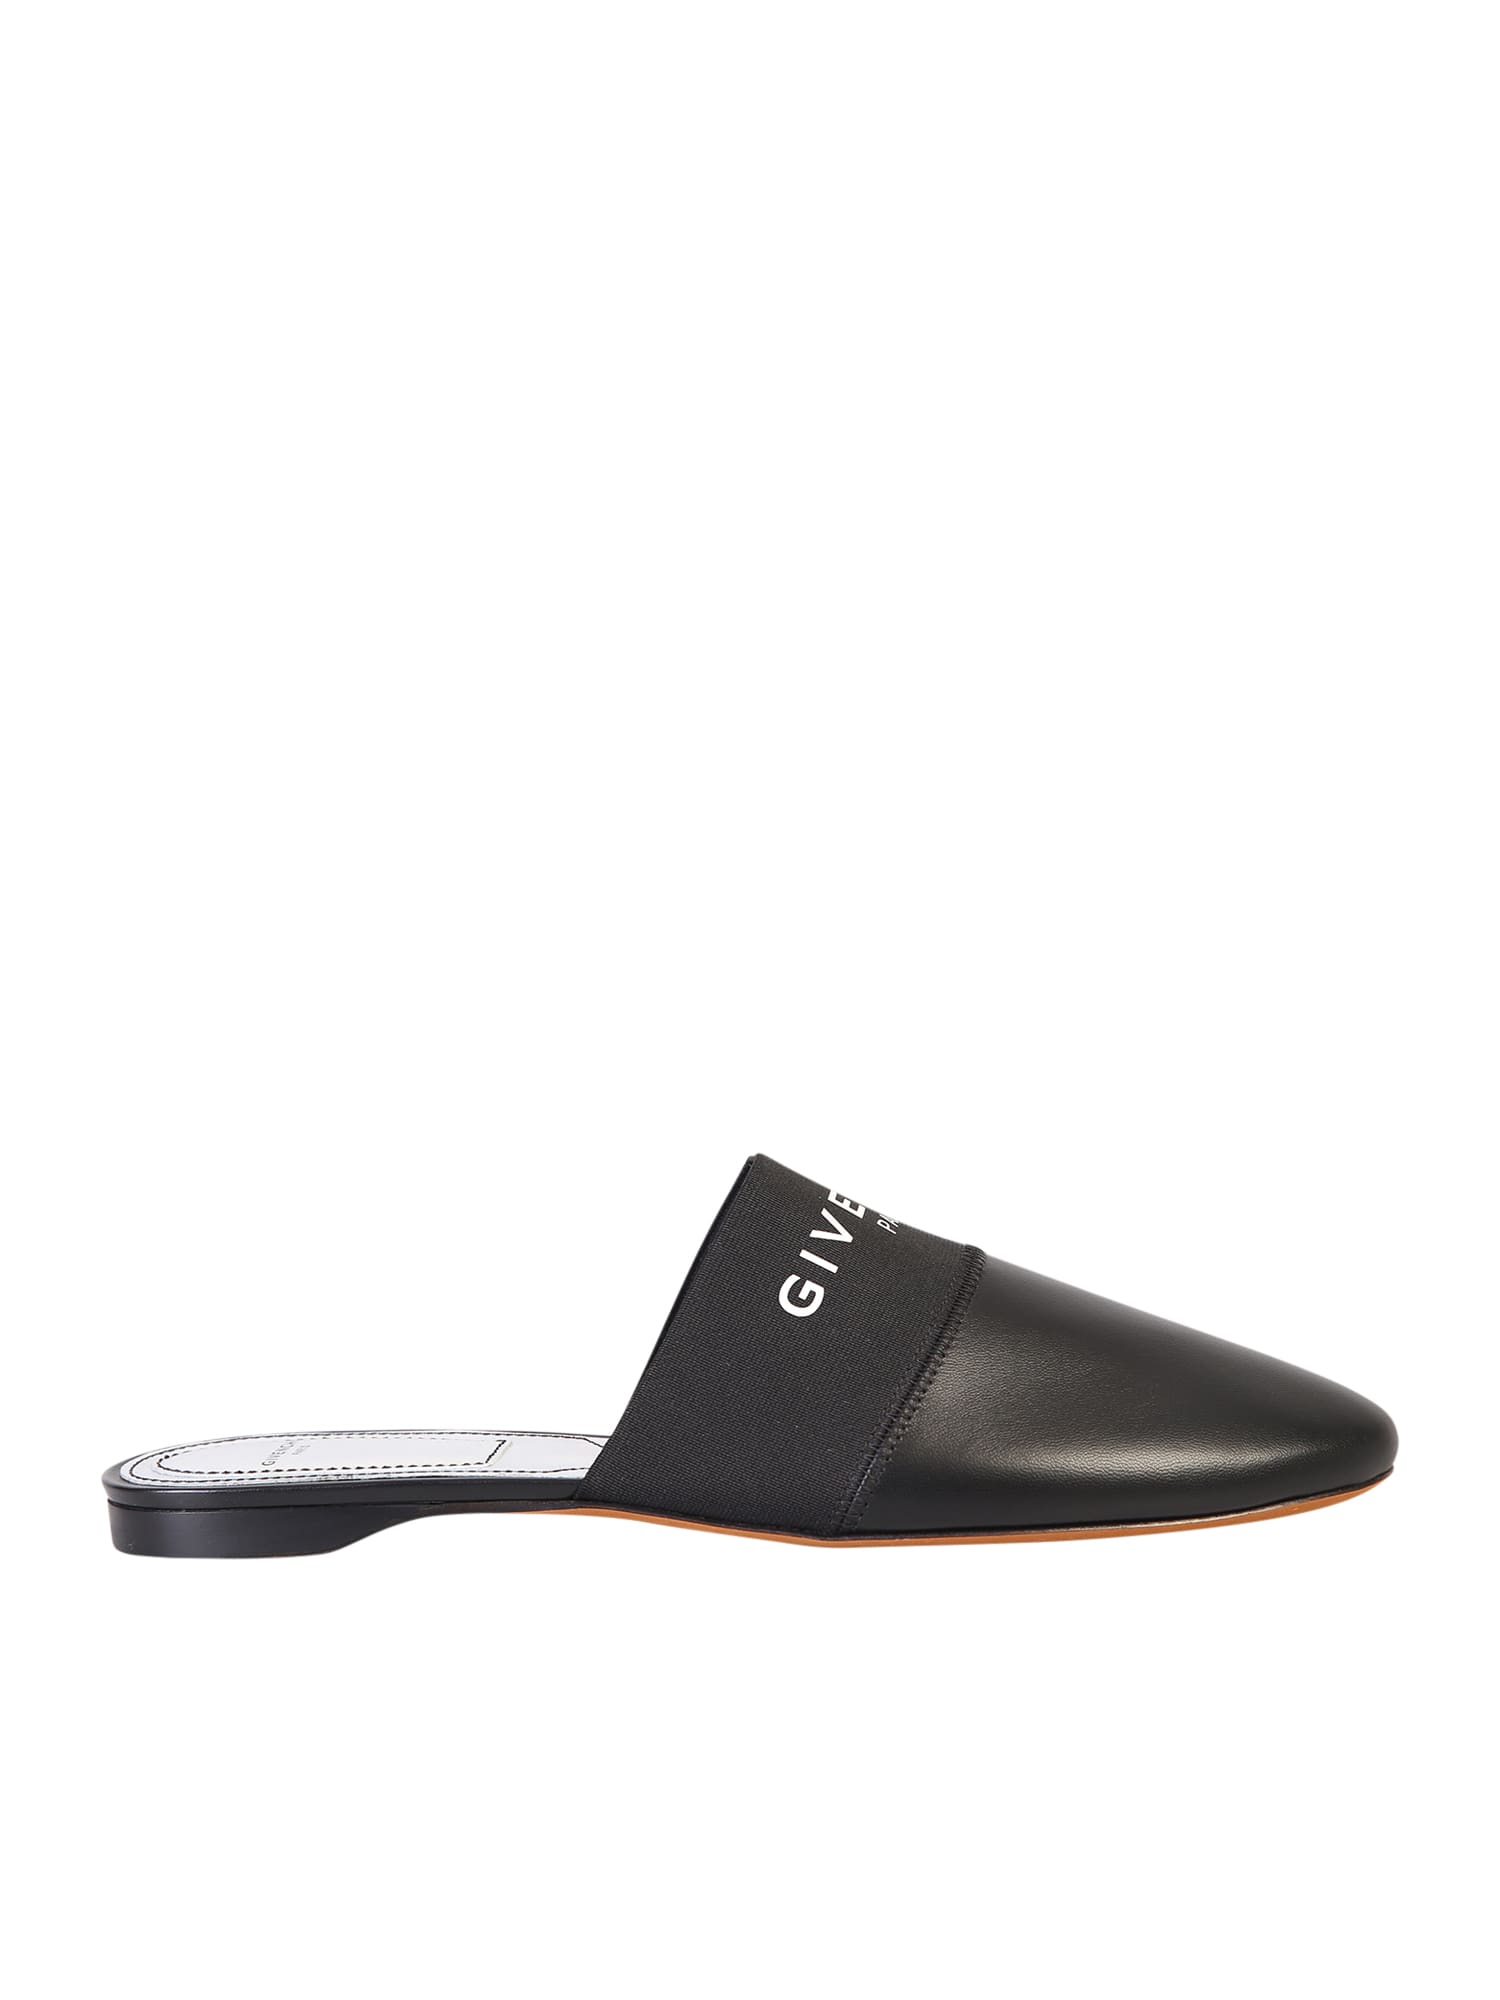 Givenchy Branded Flats